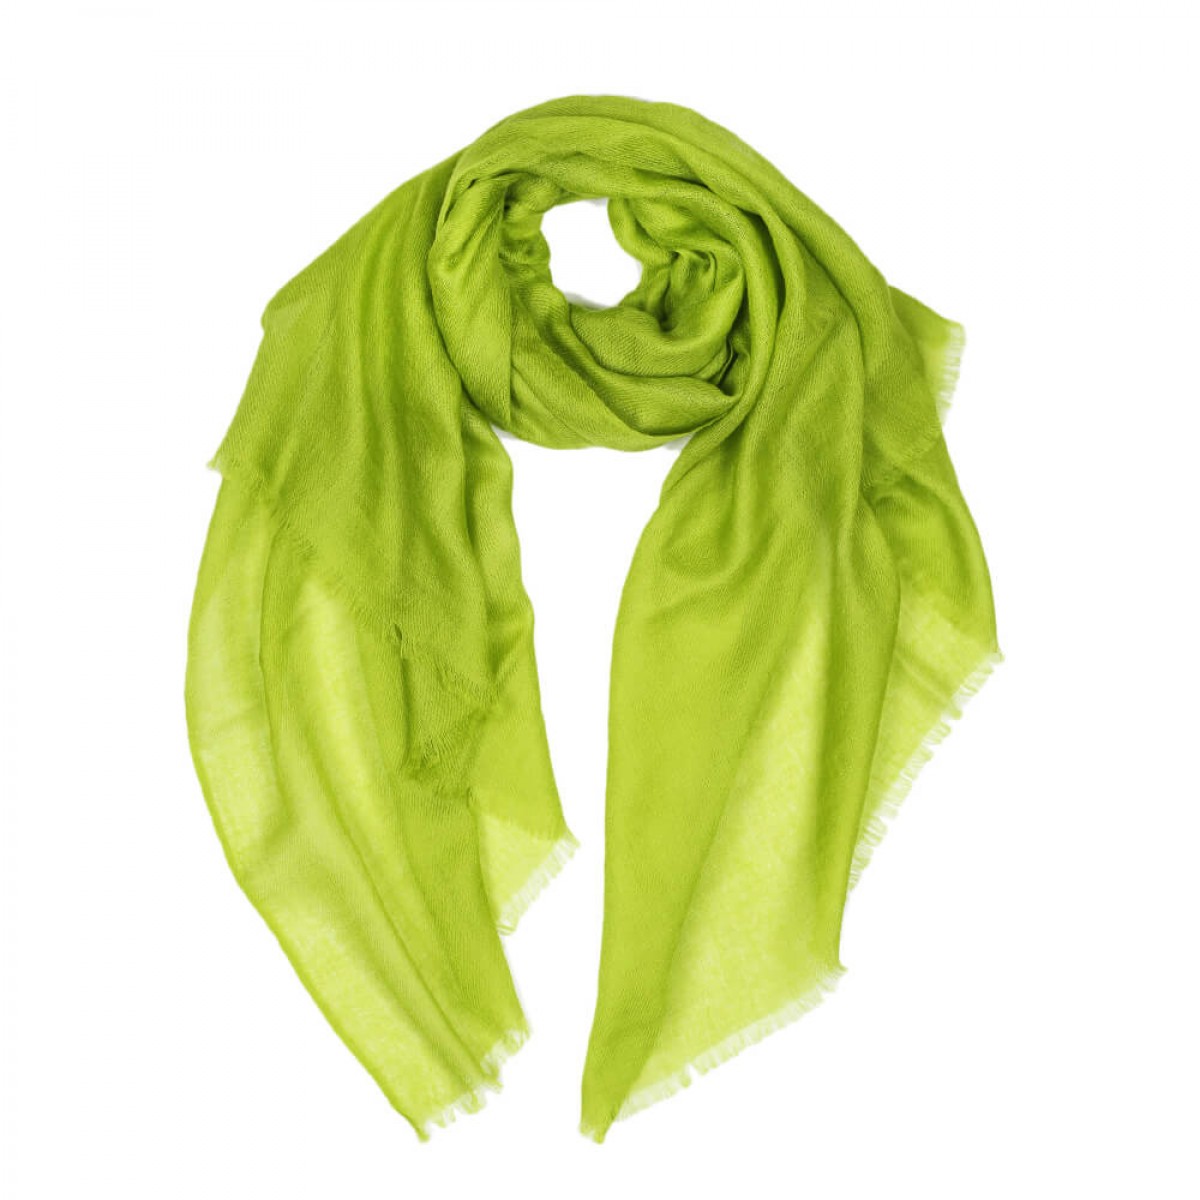 Sheer Pashmina Stole - Spring Sprout Green